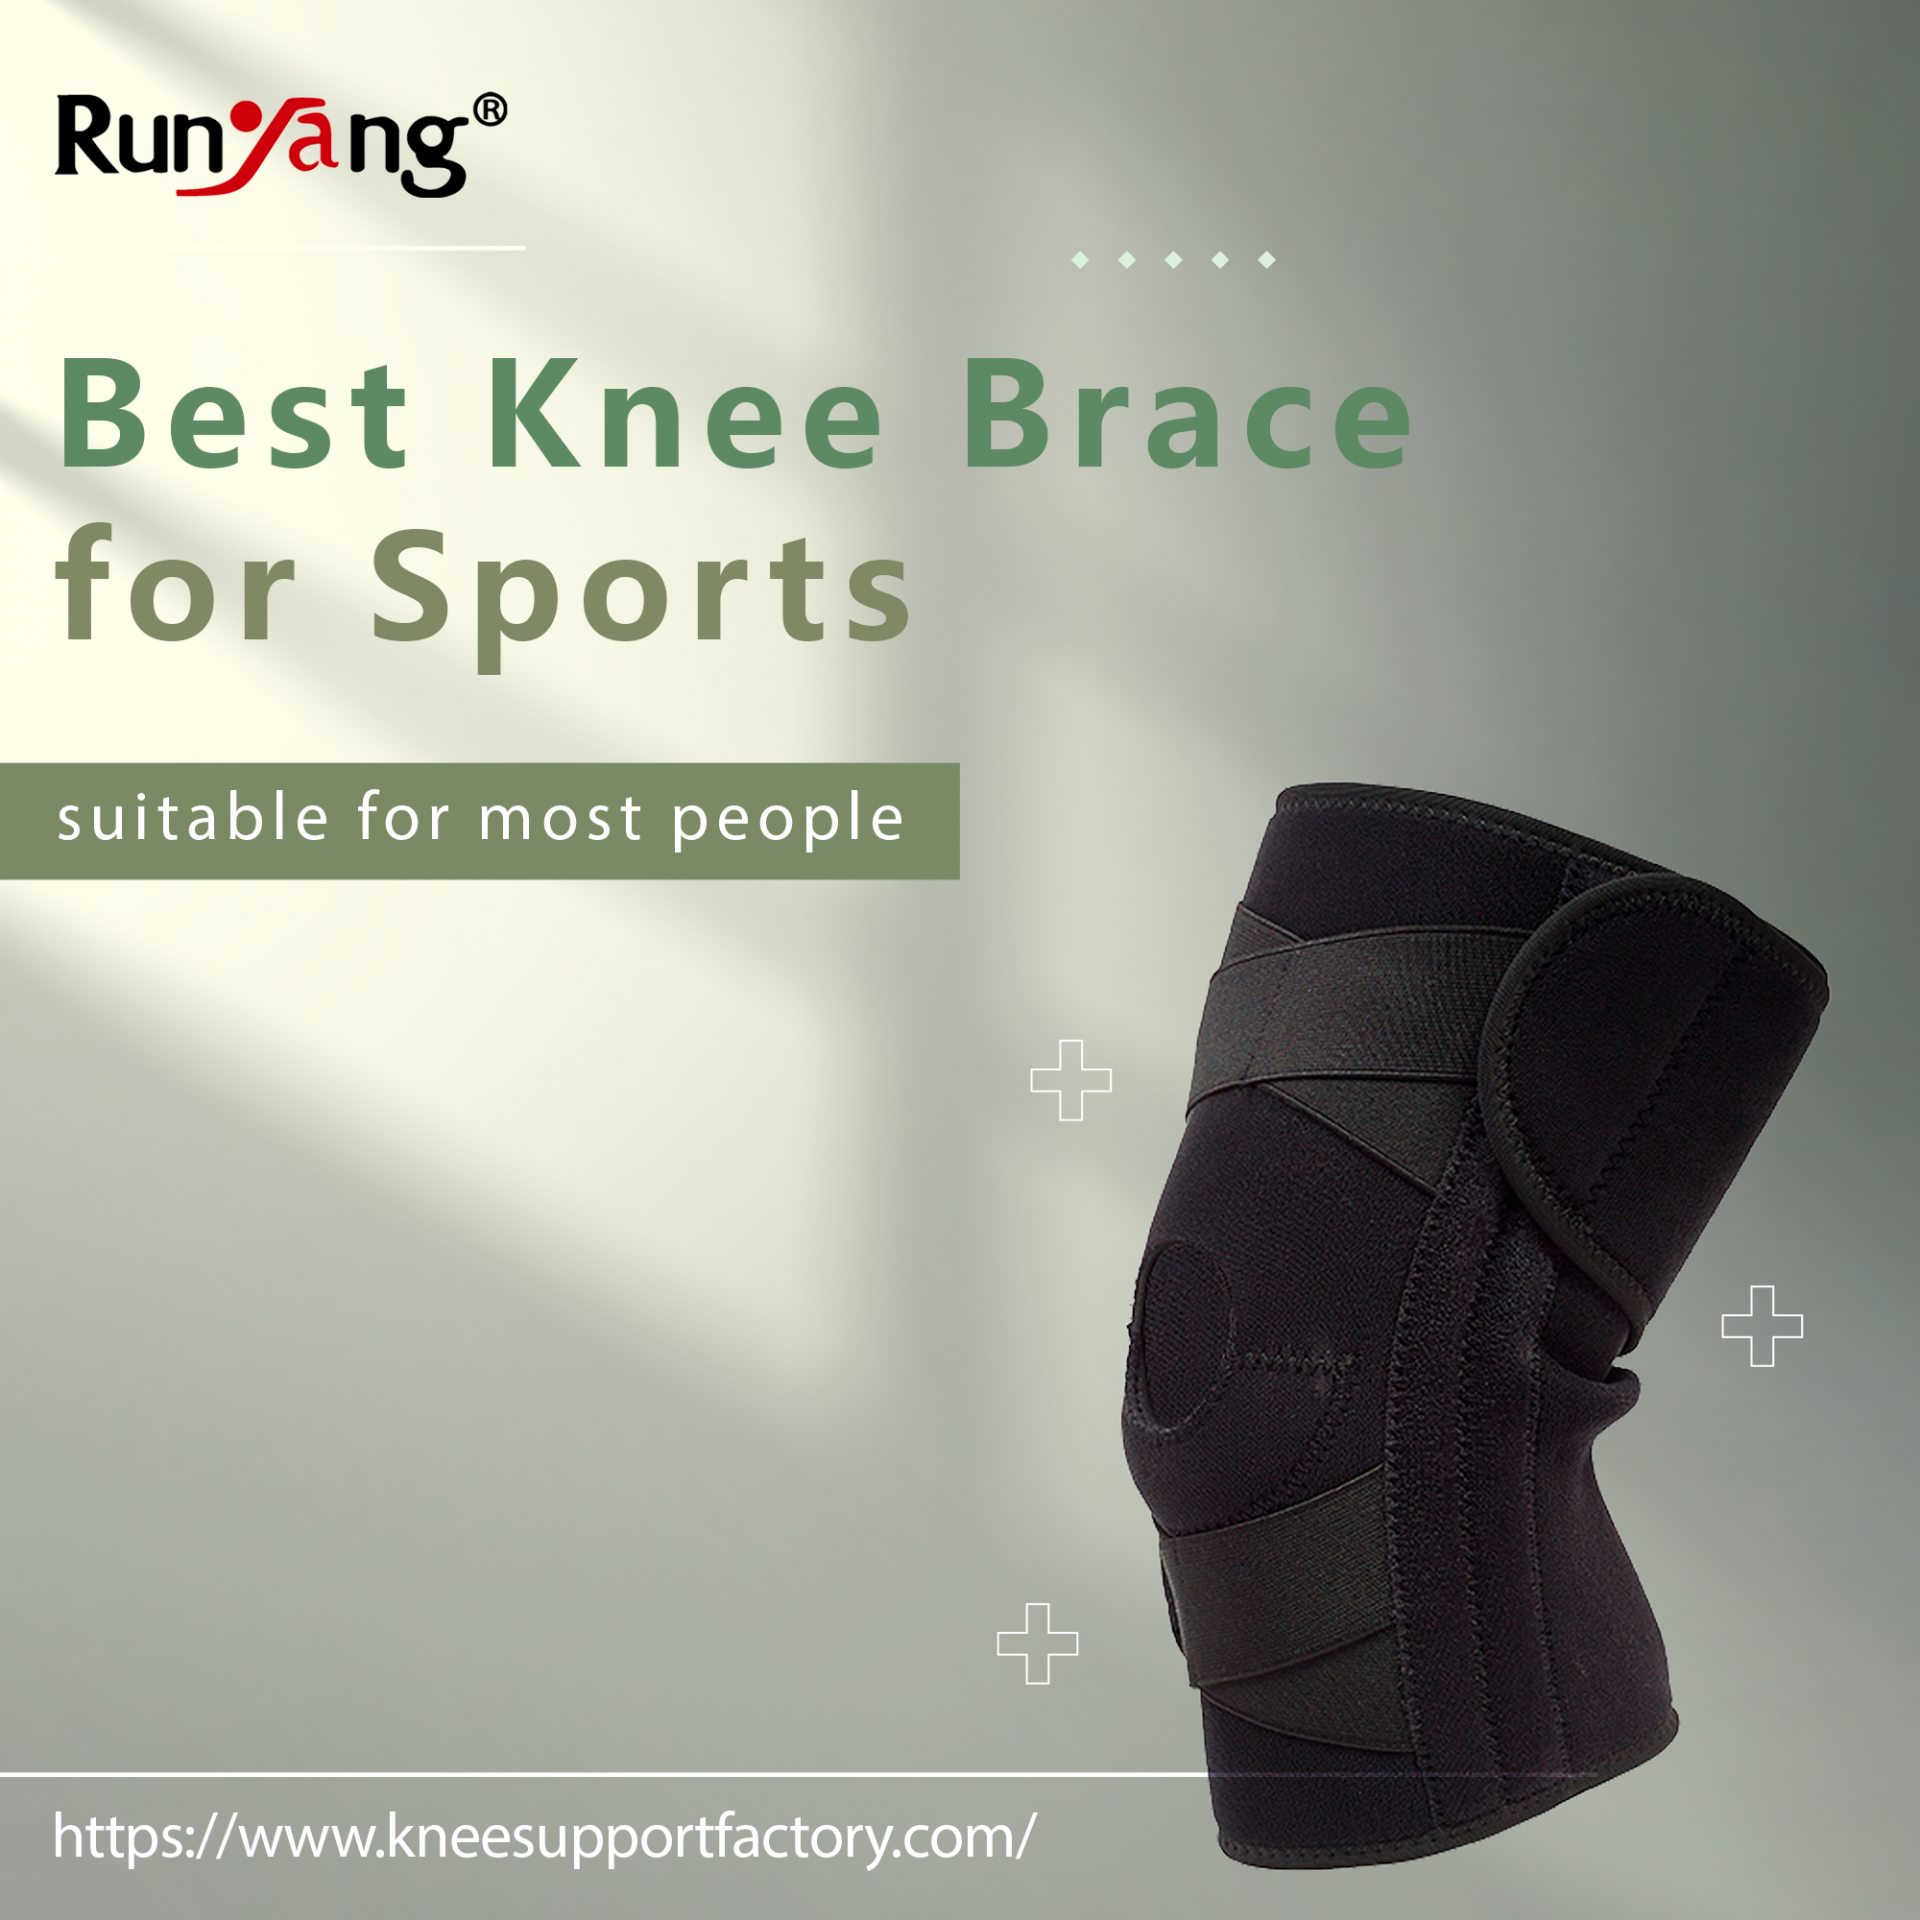 Should we wear knee support in daily life?